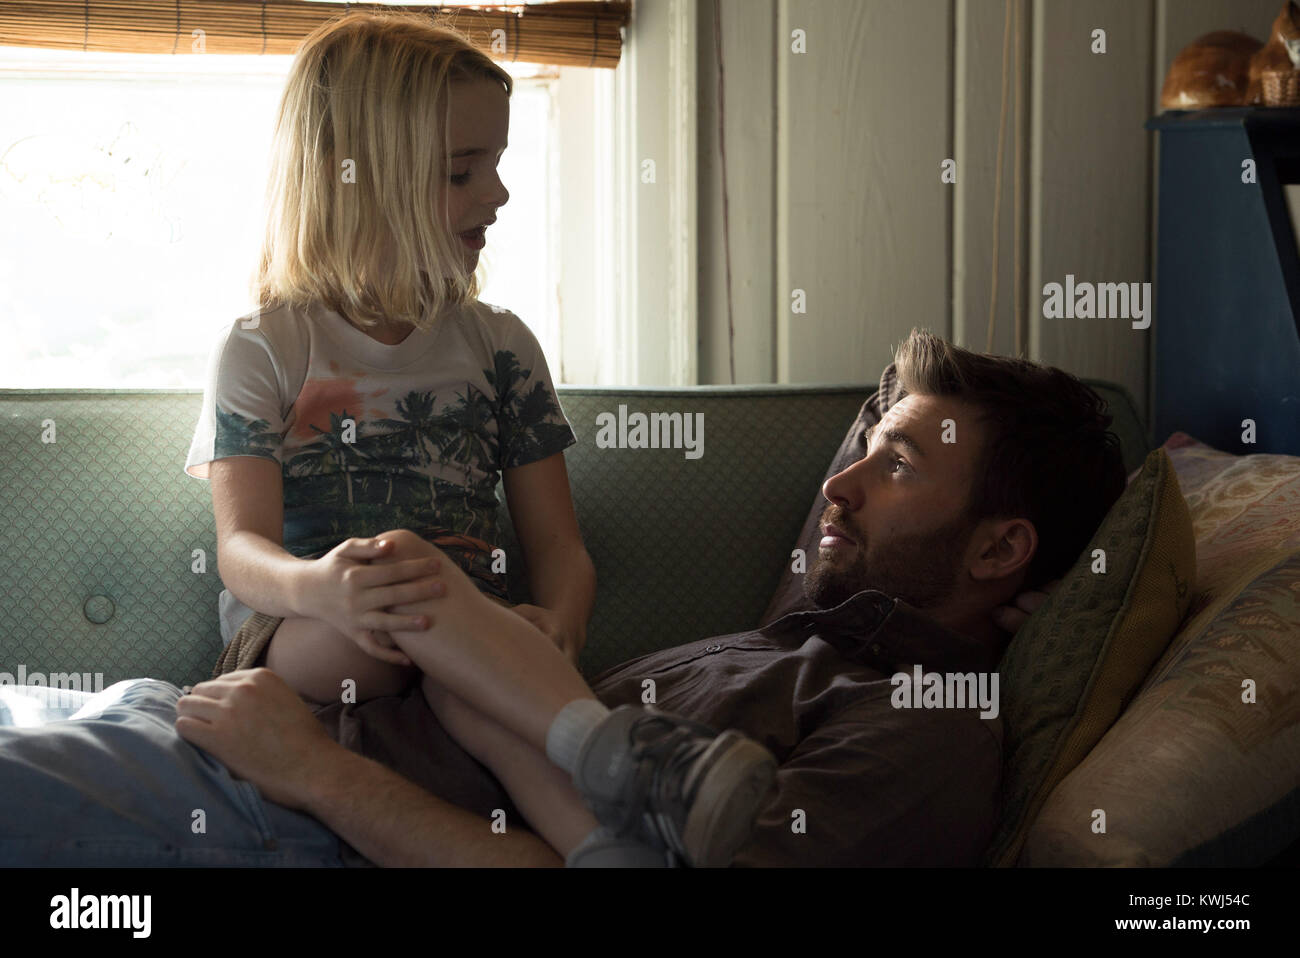 RELEASE DATE: April 12, 2017 TITLE: Gifted STUDIO: Twentieth Century Fox DIRECTOR: Marc Webb PLOT: Frank, a single man raising his child prodigy niece Mary, is drawn into a custody battle with his mother STARRING: MCKENNA GRACE as Mary Adler and CHRIS EVANS as Frank Adler. (Credit: Twentieth Century Fox/Entertainment Pictures) Stock Photo